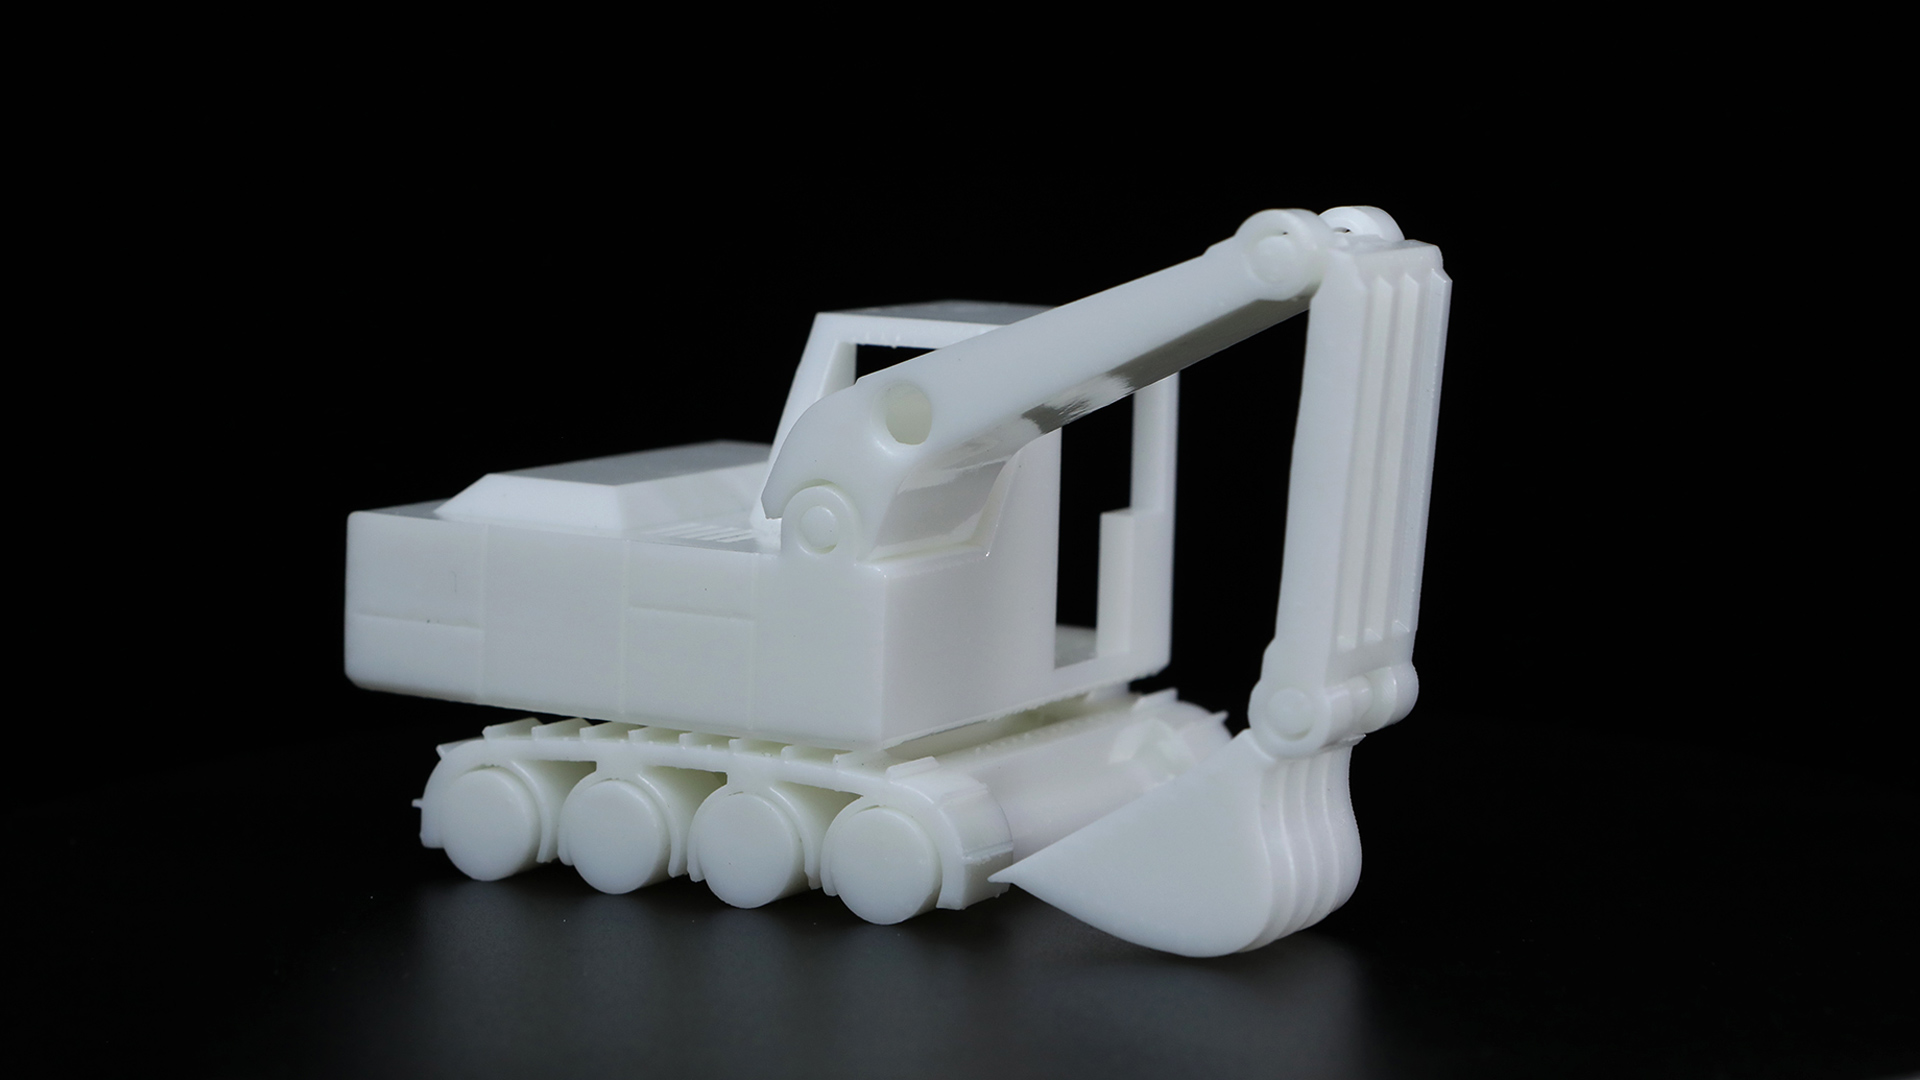 Can 3D printers print toys to make money?